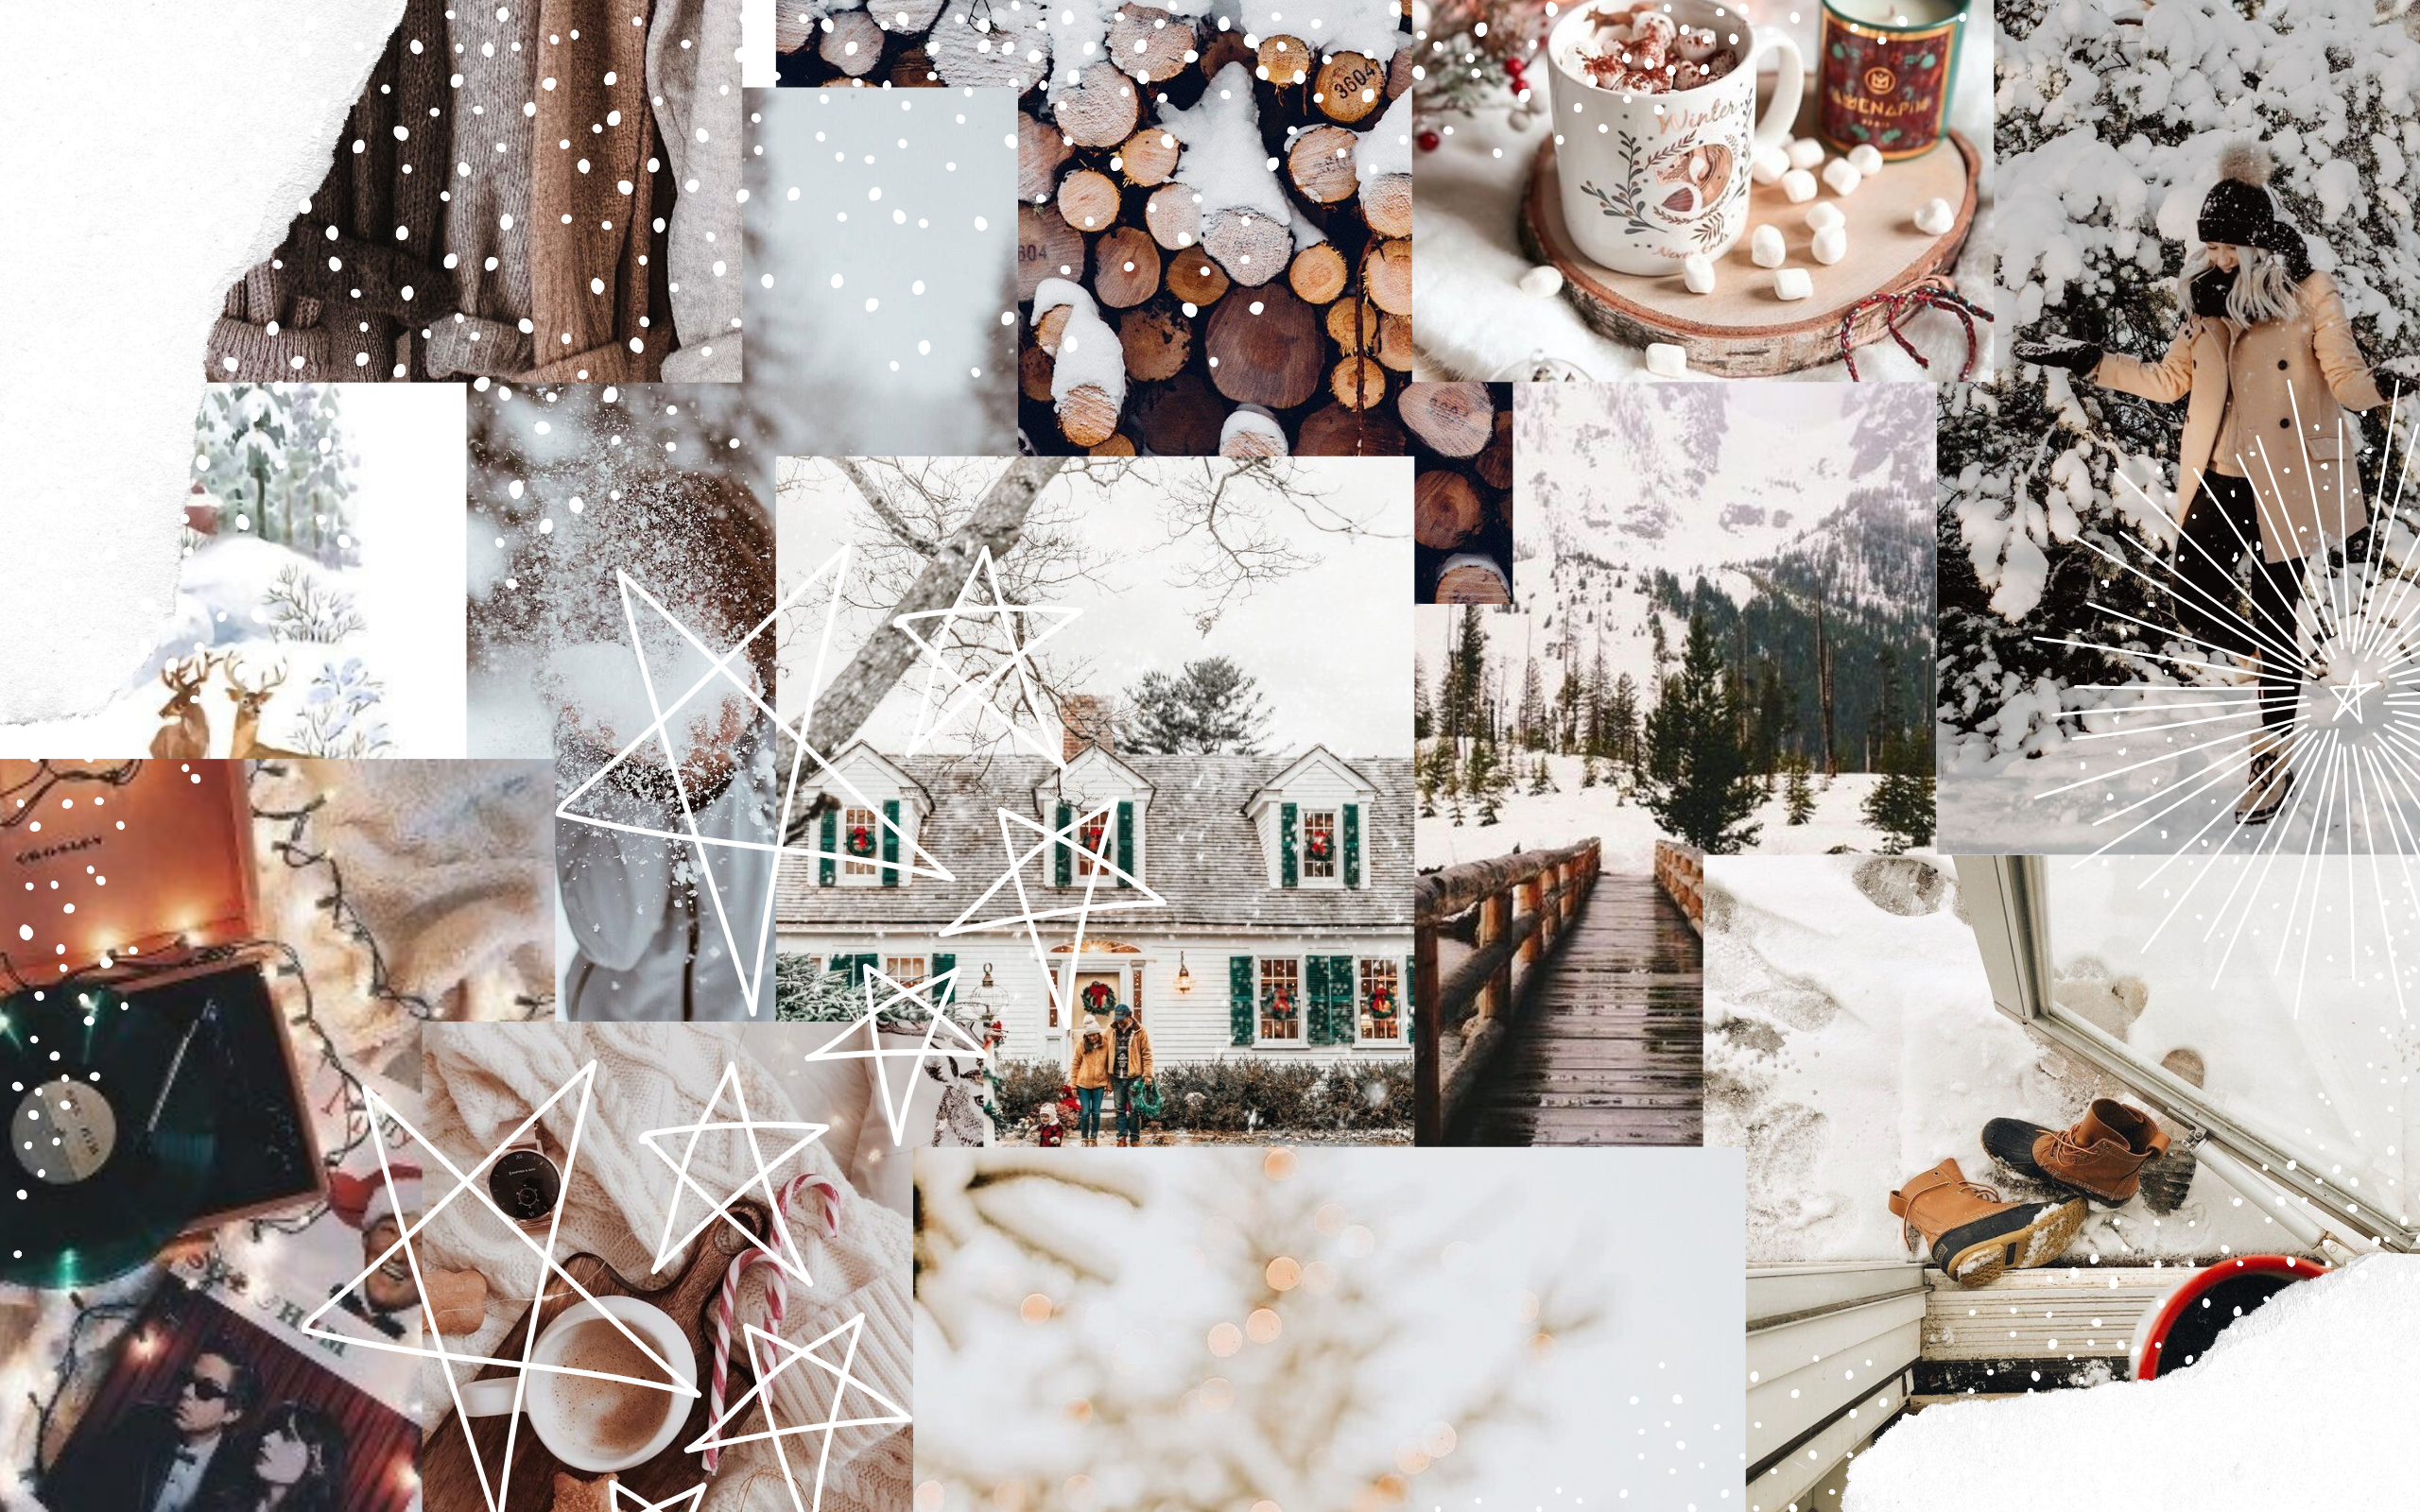 Aesthetic Christmas Laptop Wallpapers posted by Sarah Thompson